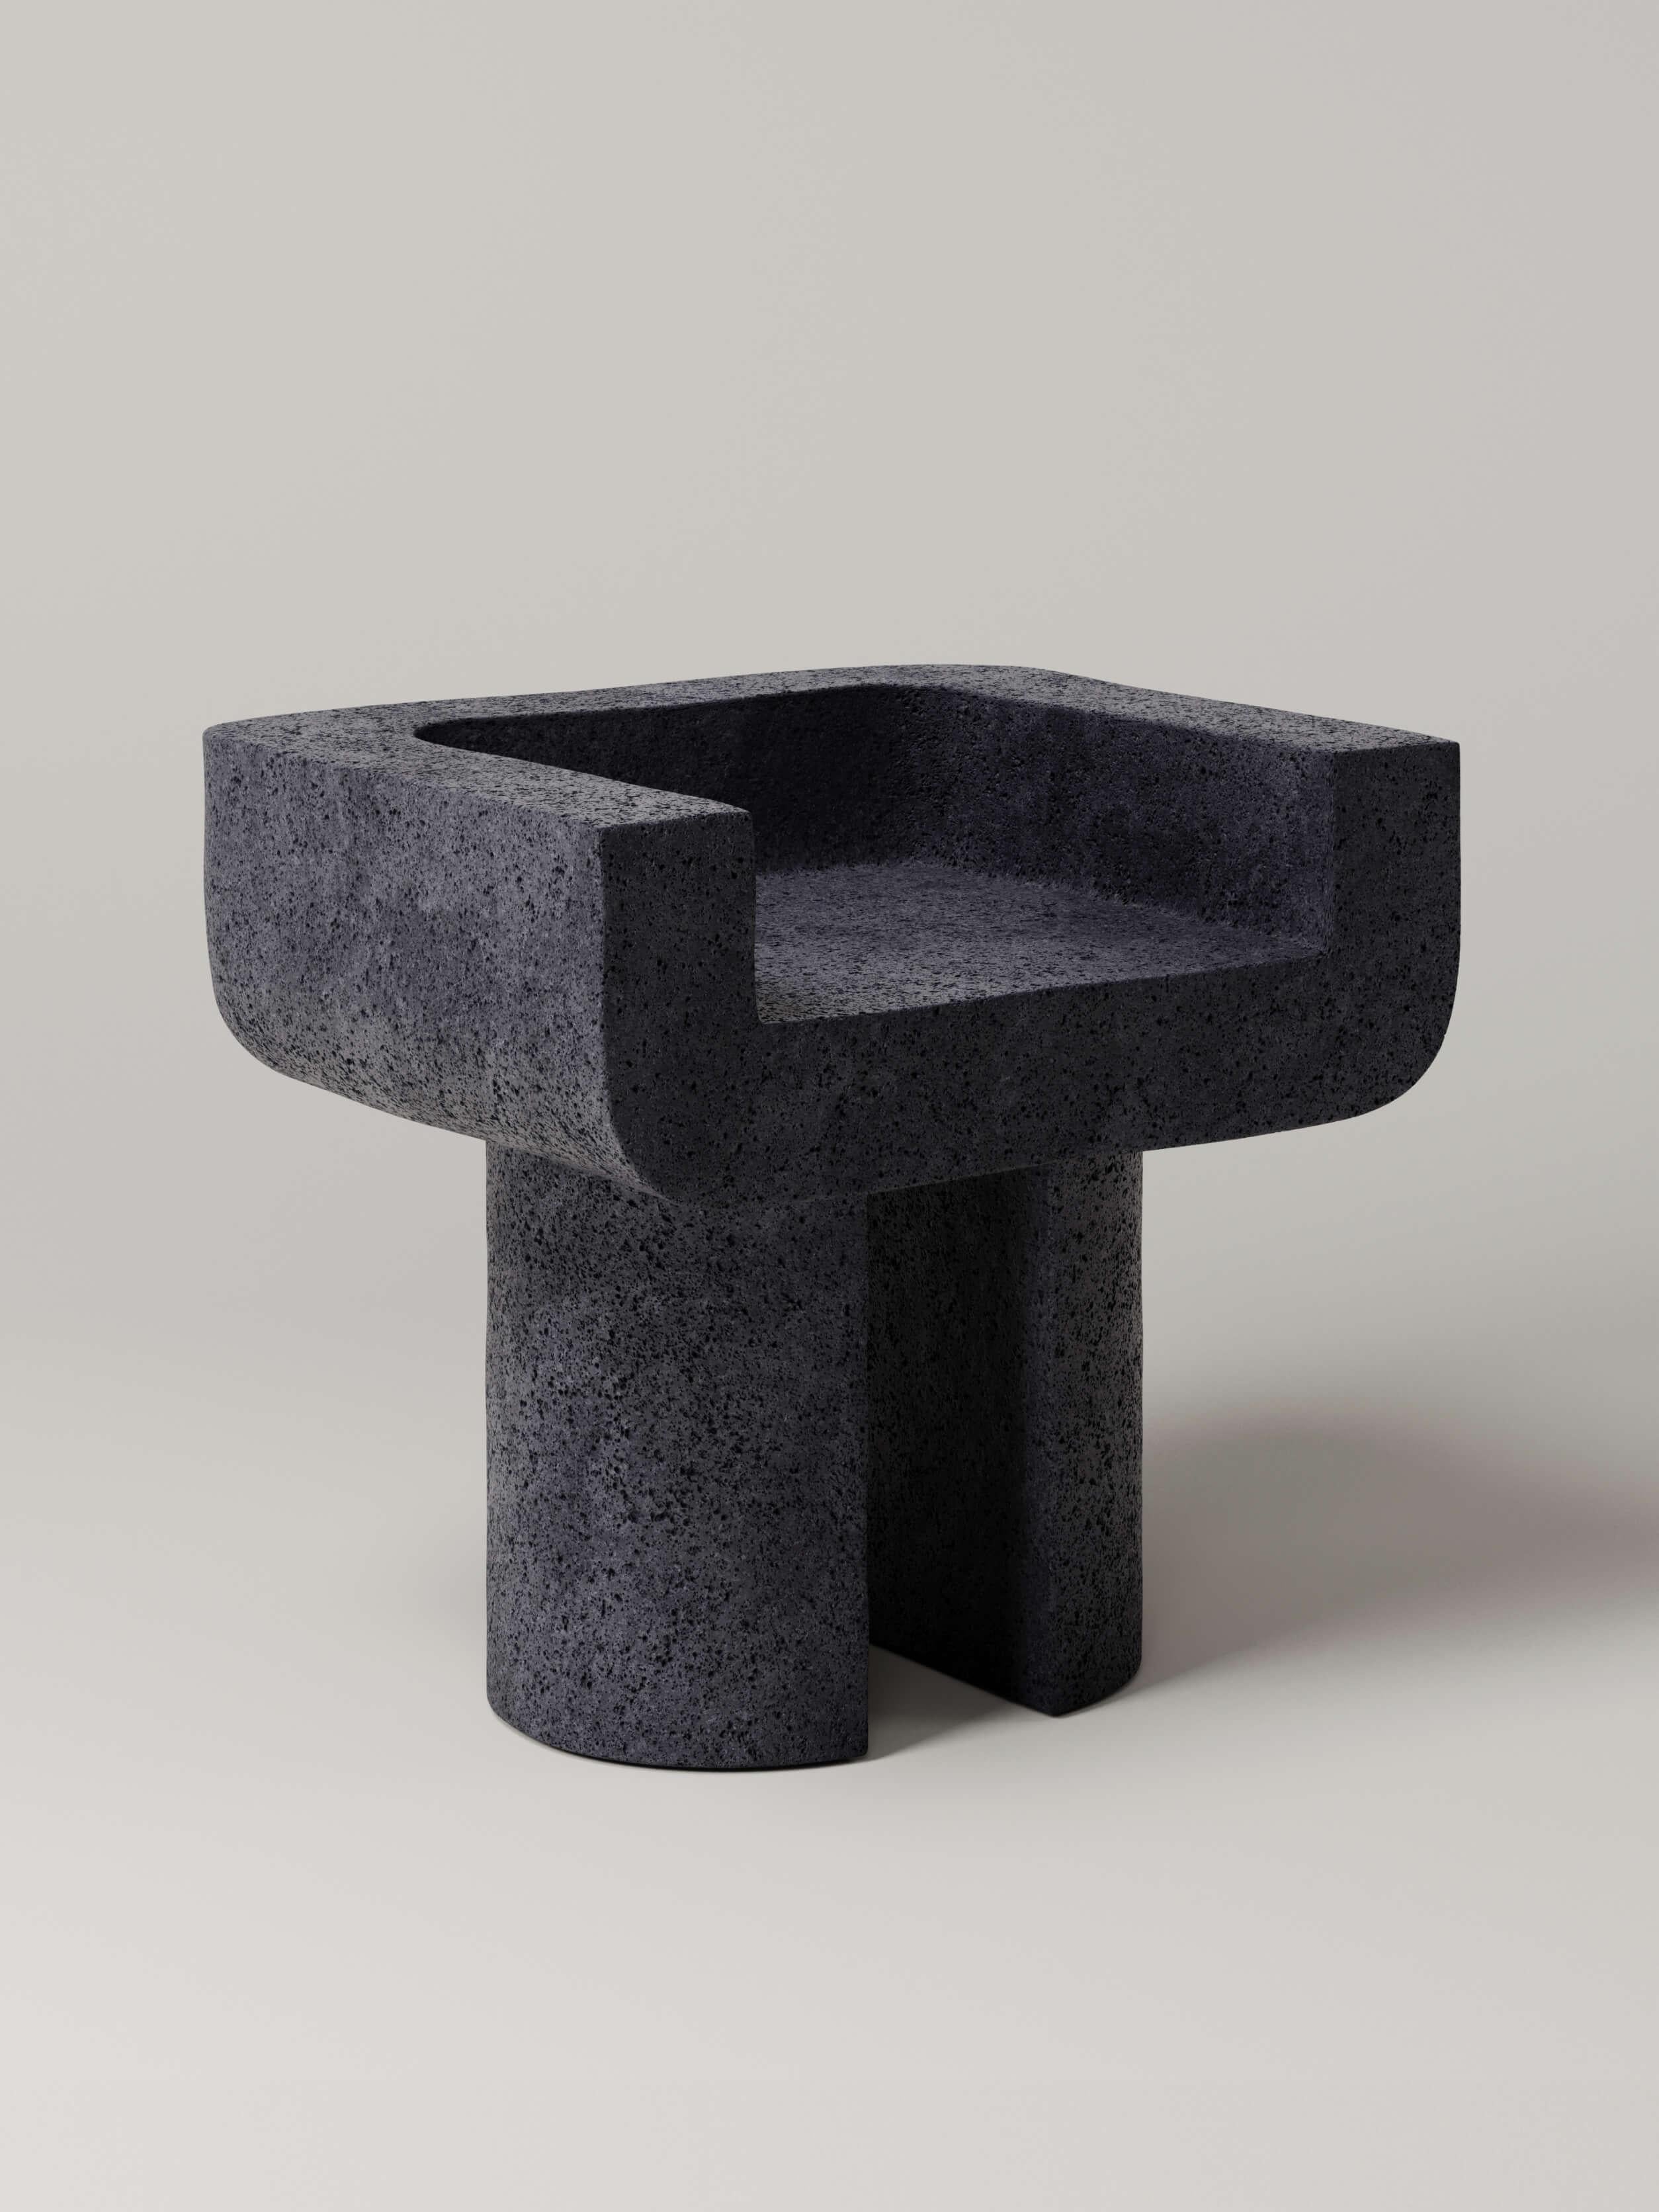 Carved from a single stone, the heavily proportioned silhouette, smooth curves, and powerful stature of the M_001 chair push the limits of chair design.

Numbered, Signed, and includes Certificate of Authenticity

*Given the unique nature of stone,